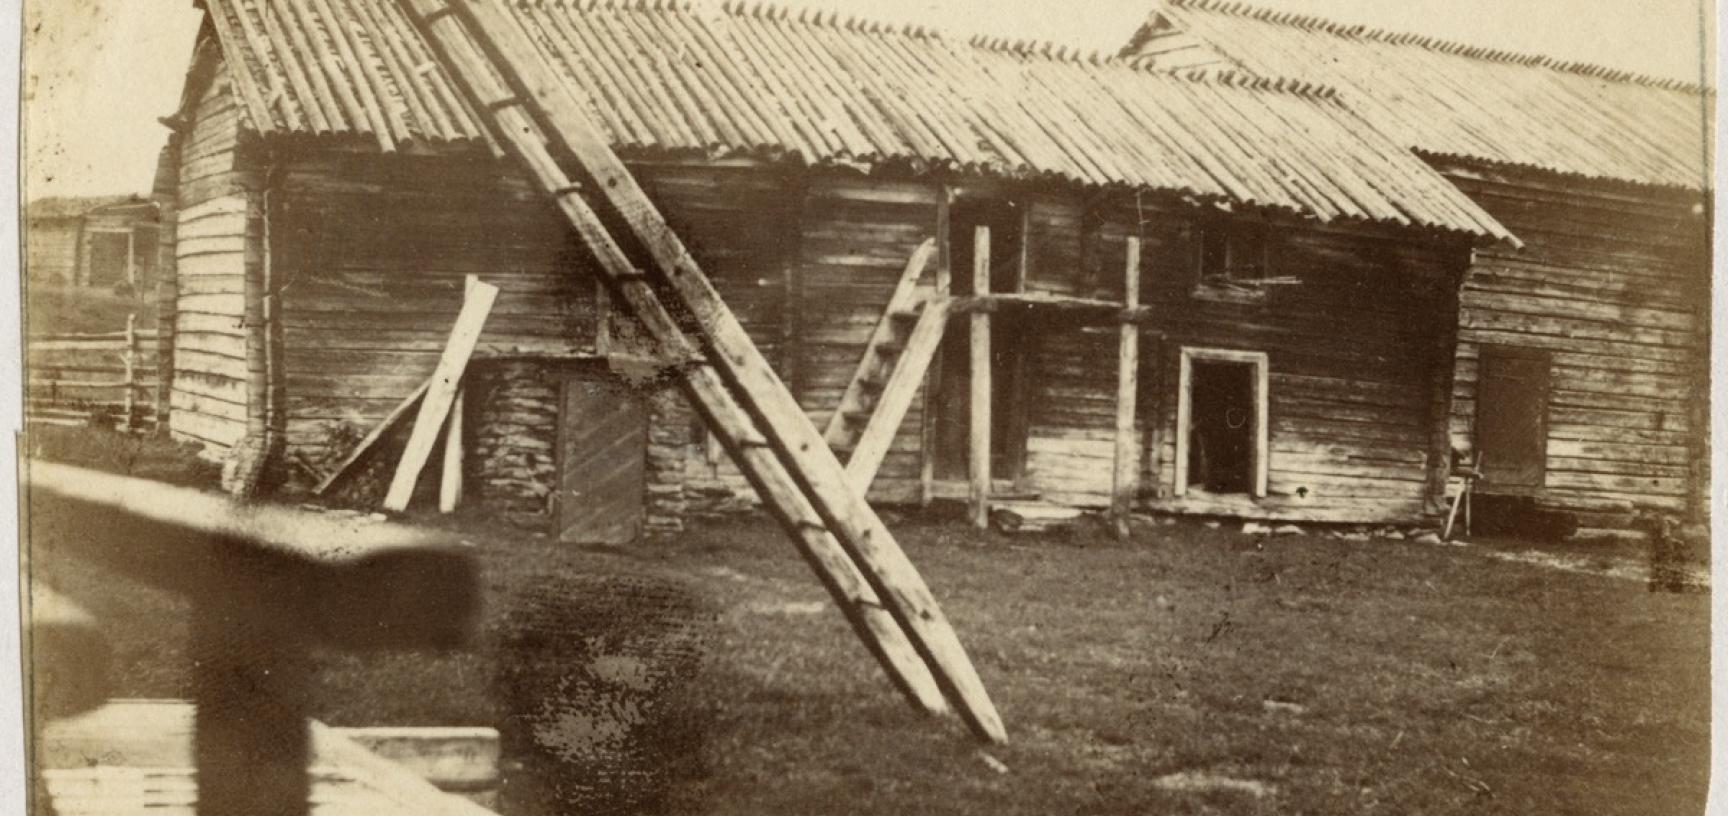 View of buildings at Sodankylä, captioned ‘Finnish homestead’, showing a storehouse for fuel and loft containing winter clothing, etc. ‘One of the peculiarities of Sodankylä is that, though it is a small village collectively, to see it all you have to do 